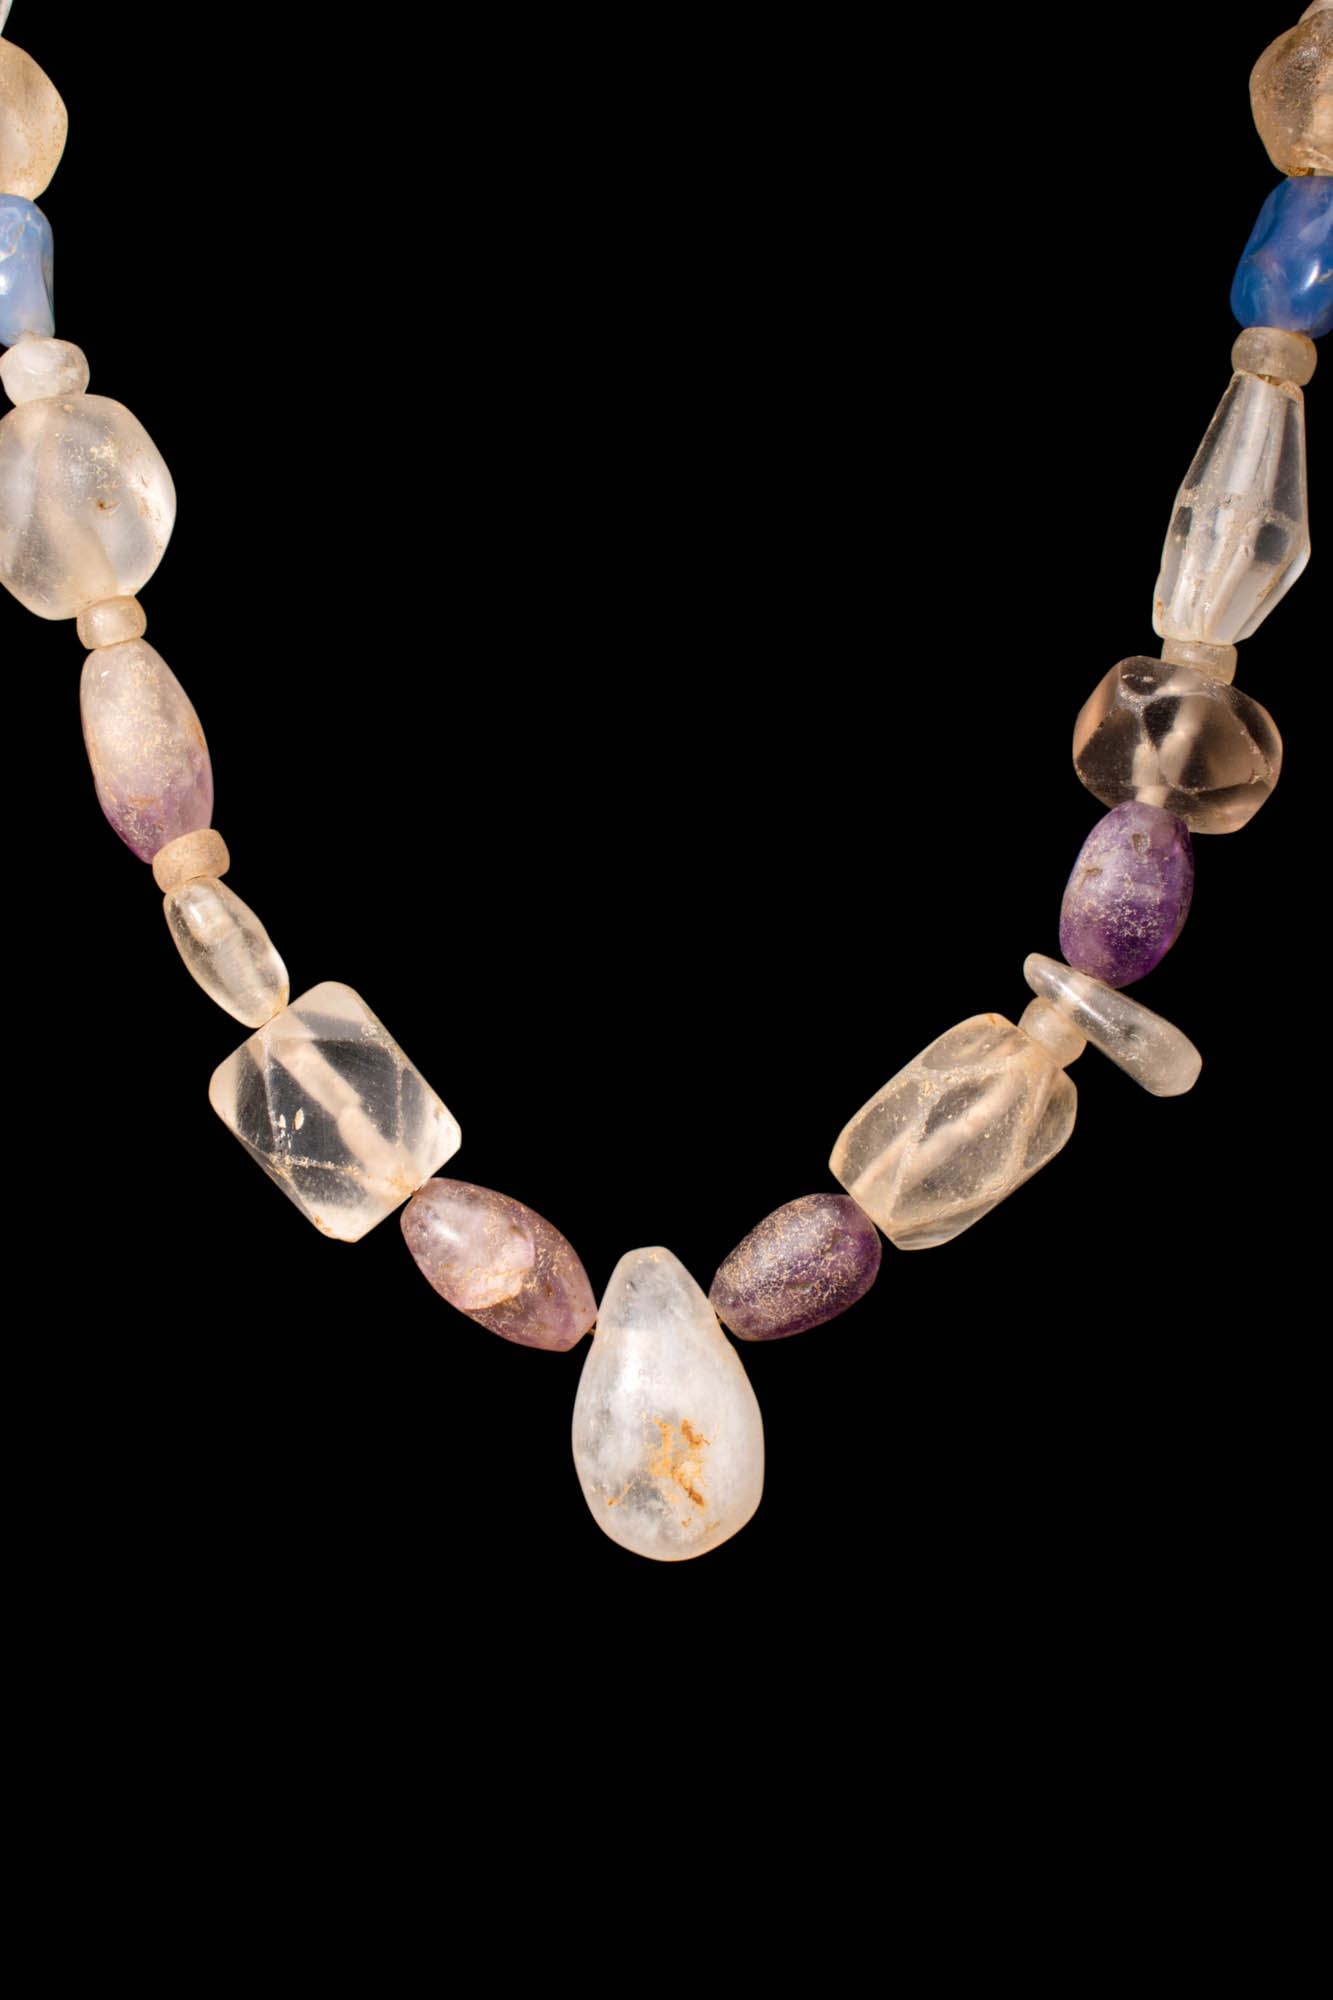 EGYPTIAN SEMI PRECIOUS STONE NECKLACE WITH PENDANT - Image 4 of 5